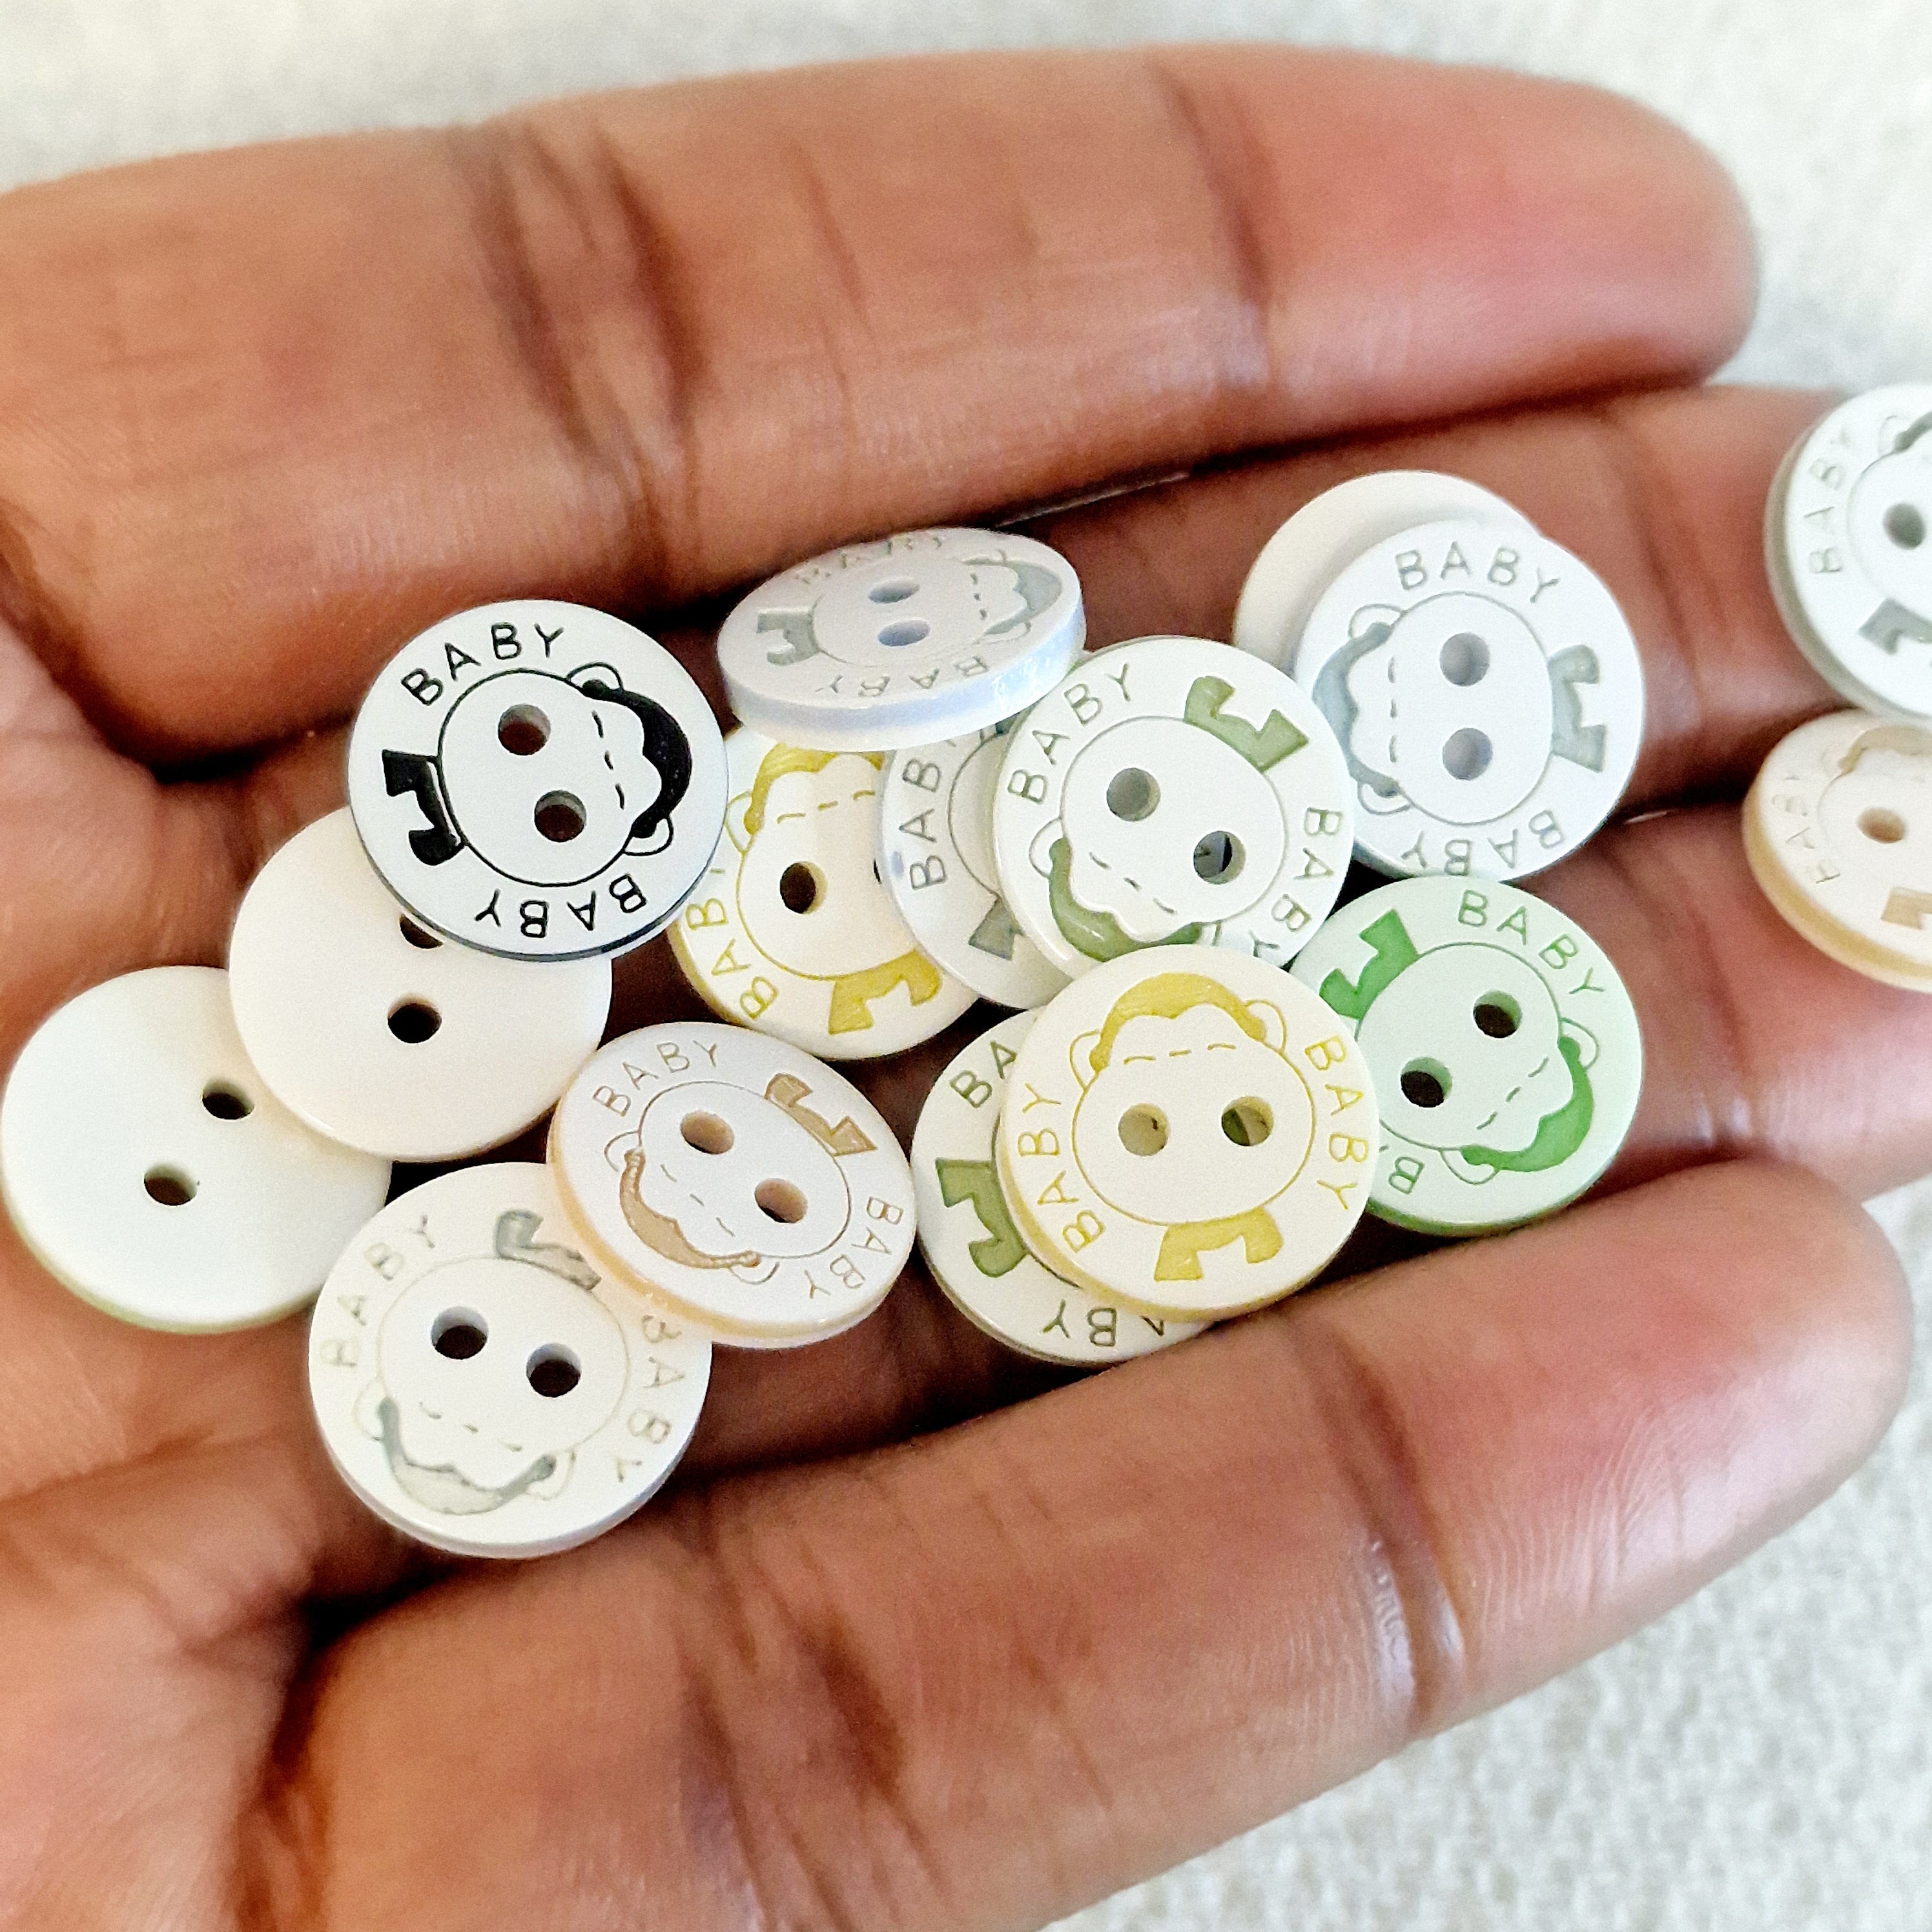 MajorCrafts 48pcs 12.5mm Mixed Colours 'Baby' Printed 2 Holes Small Round Resin Sewing Buttons